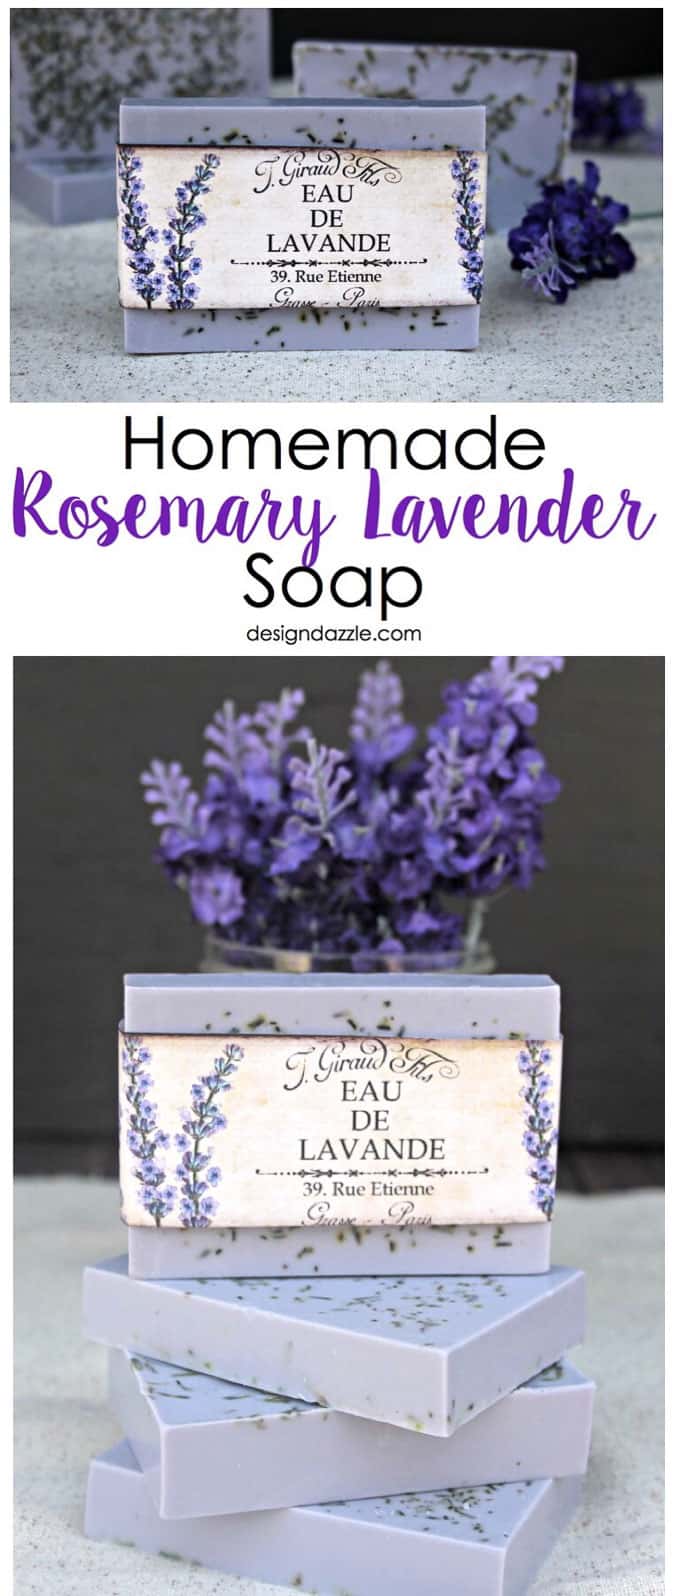 This Homemade Rosemary Lavender Soap recipe is surprisingly simple and turns out absolutely gorgeous every time you make it! Perfect for a Mother's Day gift! #mothersday | Design Dazzle